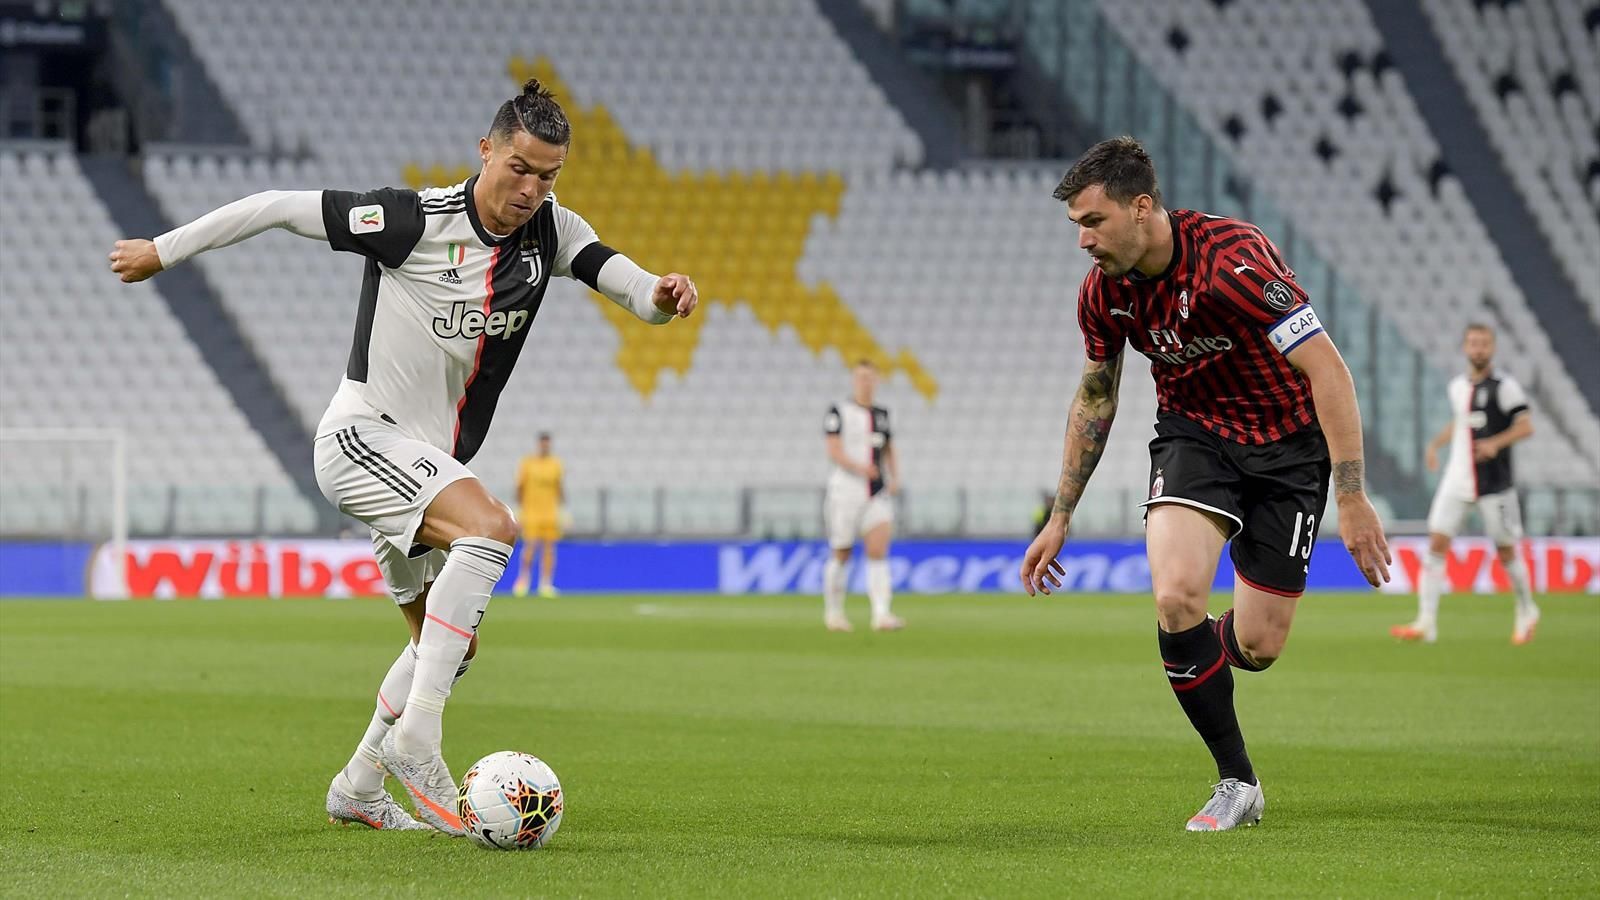 Juventus Enters Italian Cup Final despite Their Match with Milan Ending in a Draw